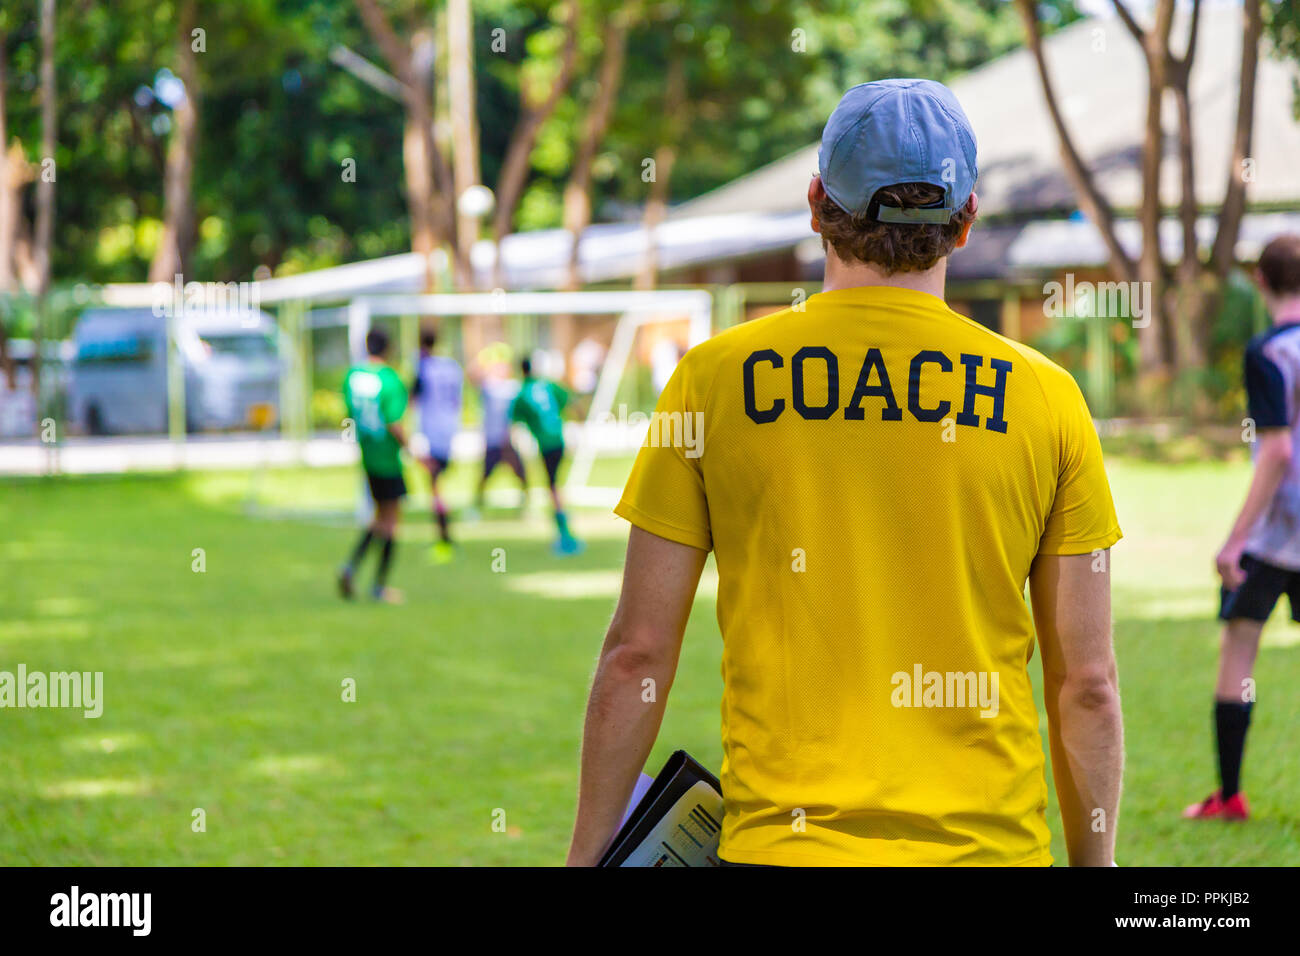 Back view of male soccer or football coach in yellow shirt with word COACH written on back, standing on the sideline watching his team play, good for  Stock Photo